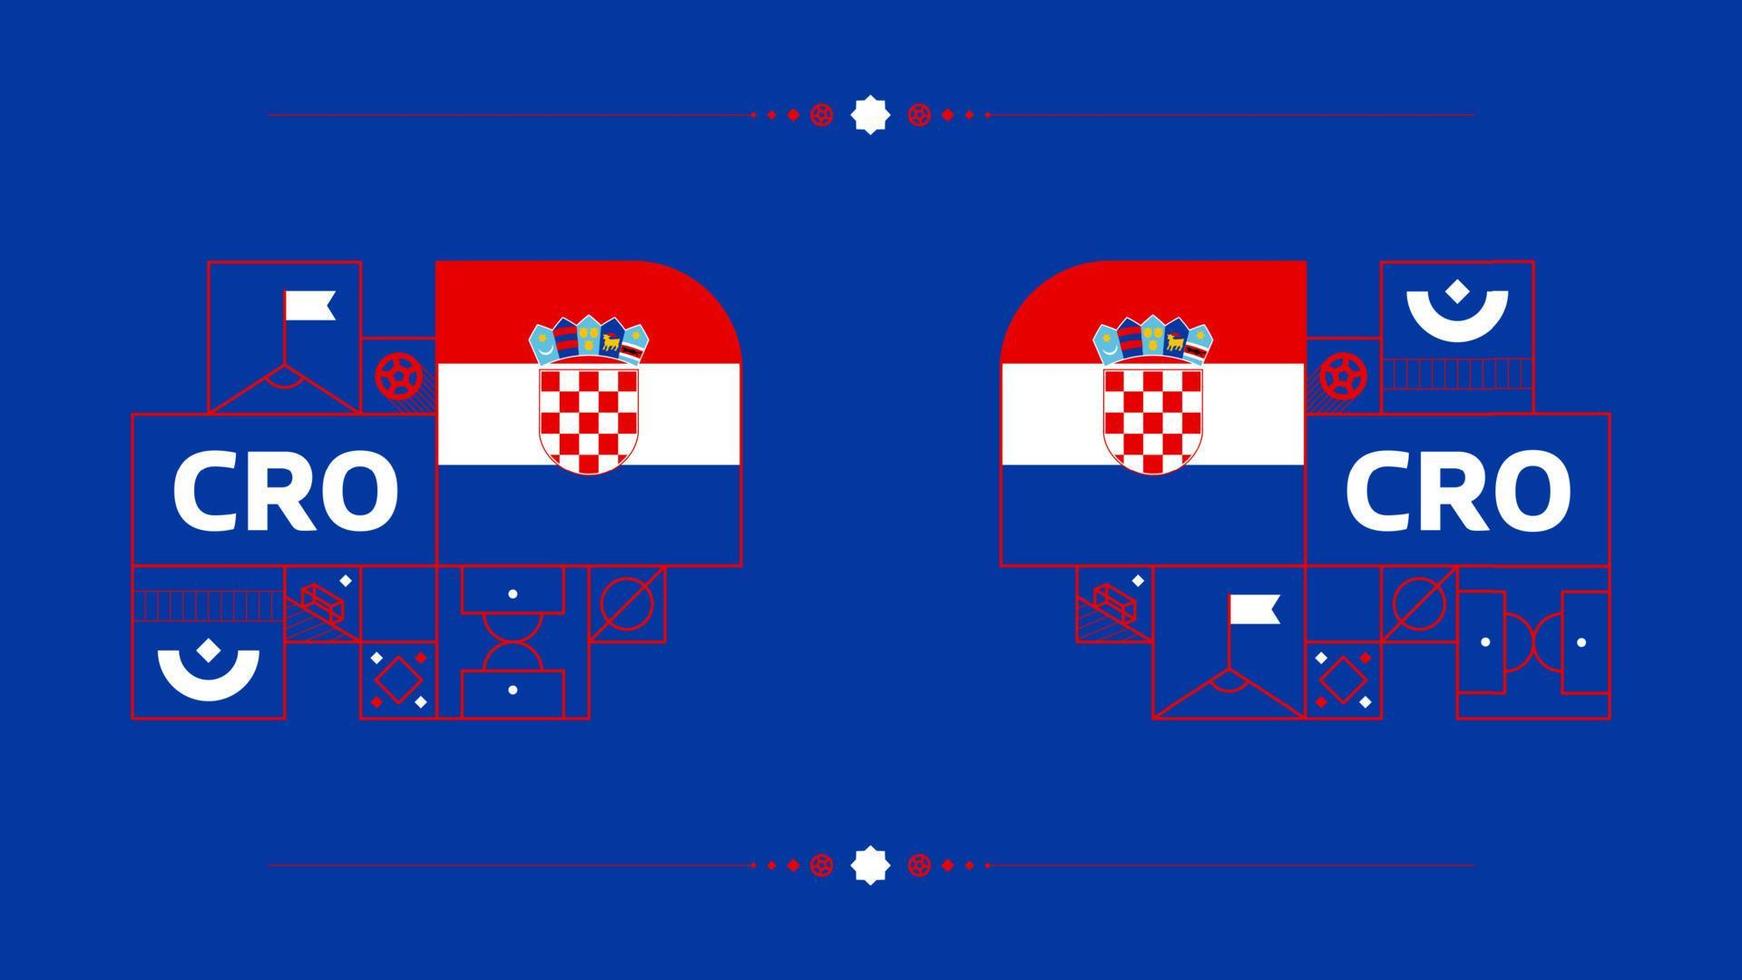 croatia flag for 2022 football cup tournament. isolated National team flag with geometric elements for 2022 soccer or football Vector illustration